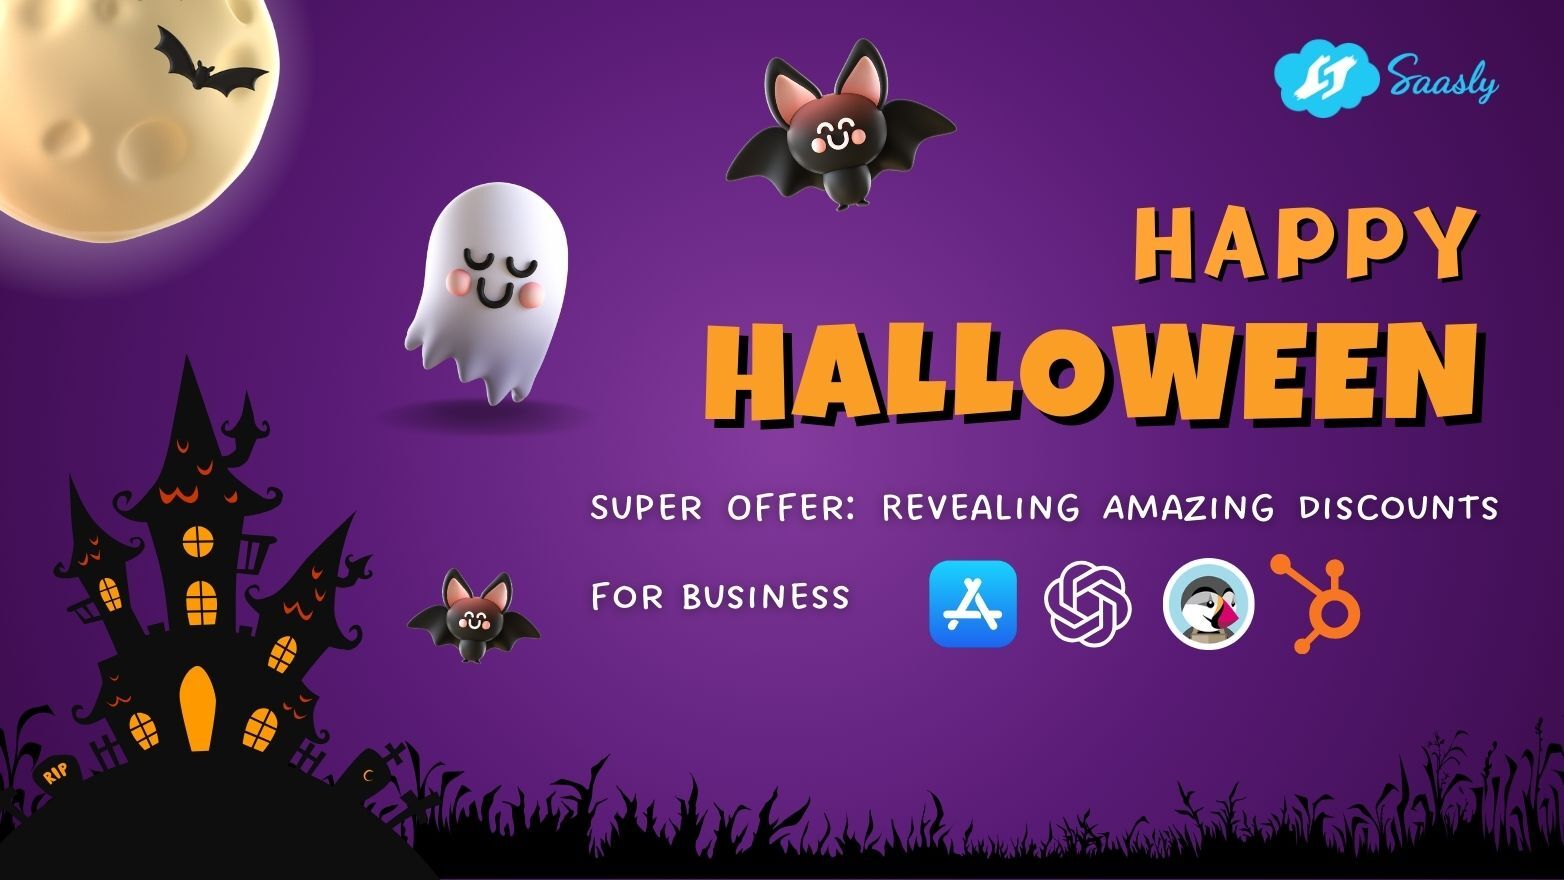 Saasly's Halloween Super Offer: Revealing Amazing Discounts for Business Transformation